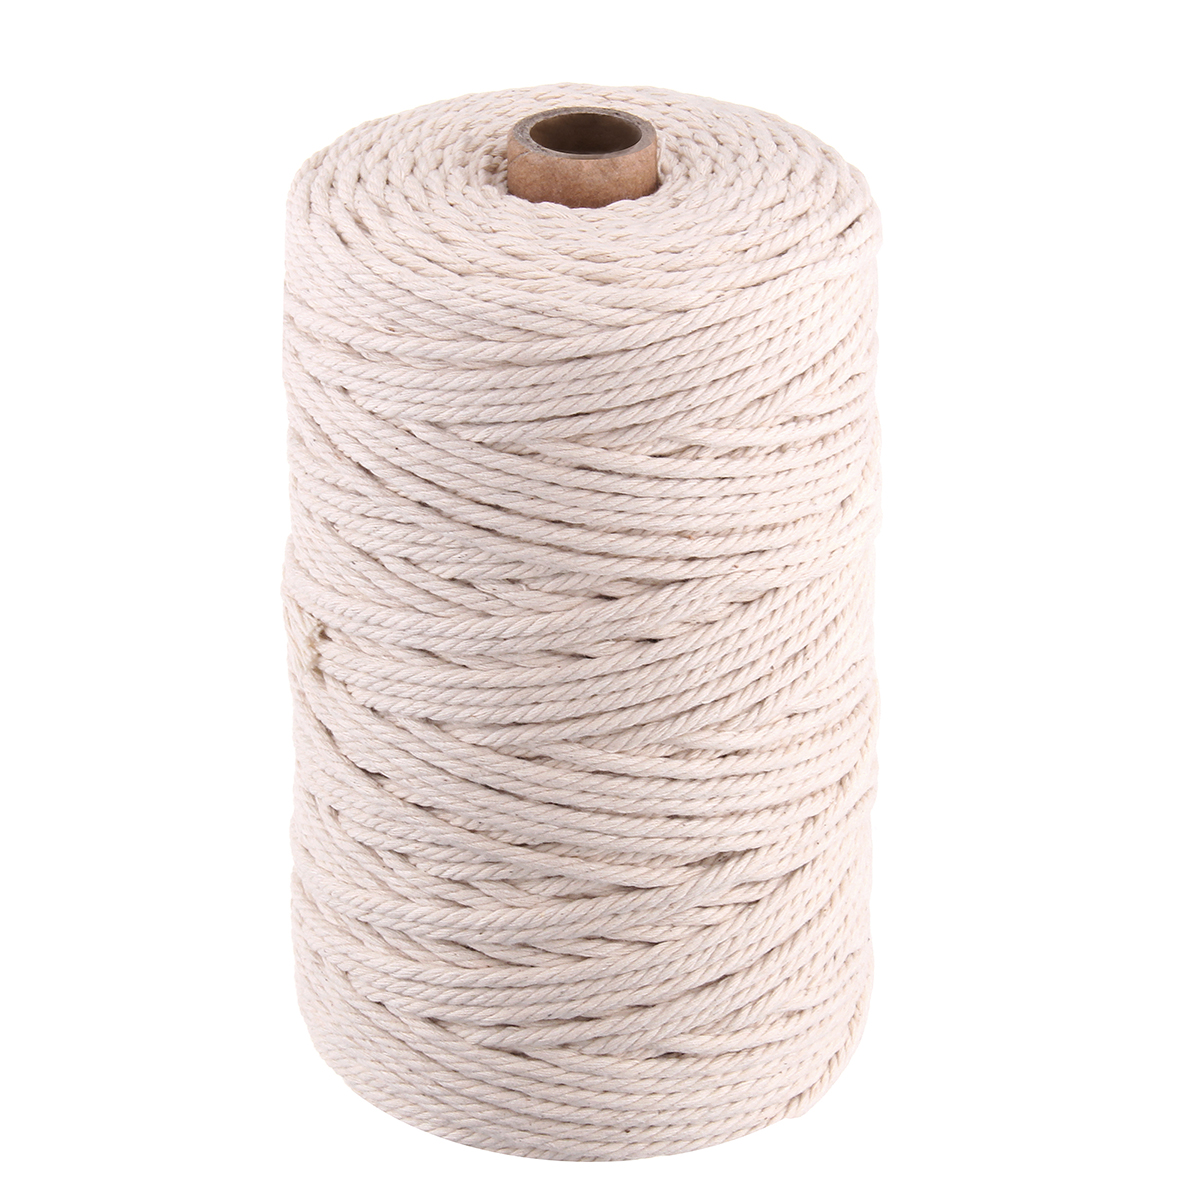 2-5mm-Cotton-String-Twisted-Cord-Crafting-Macrame-Rope-Decor-Hand-Braided-Wire-1320396